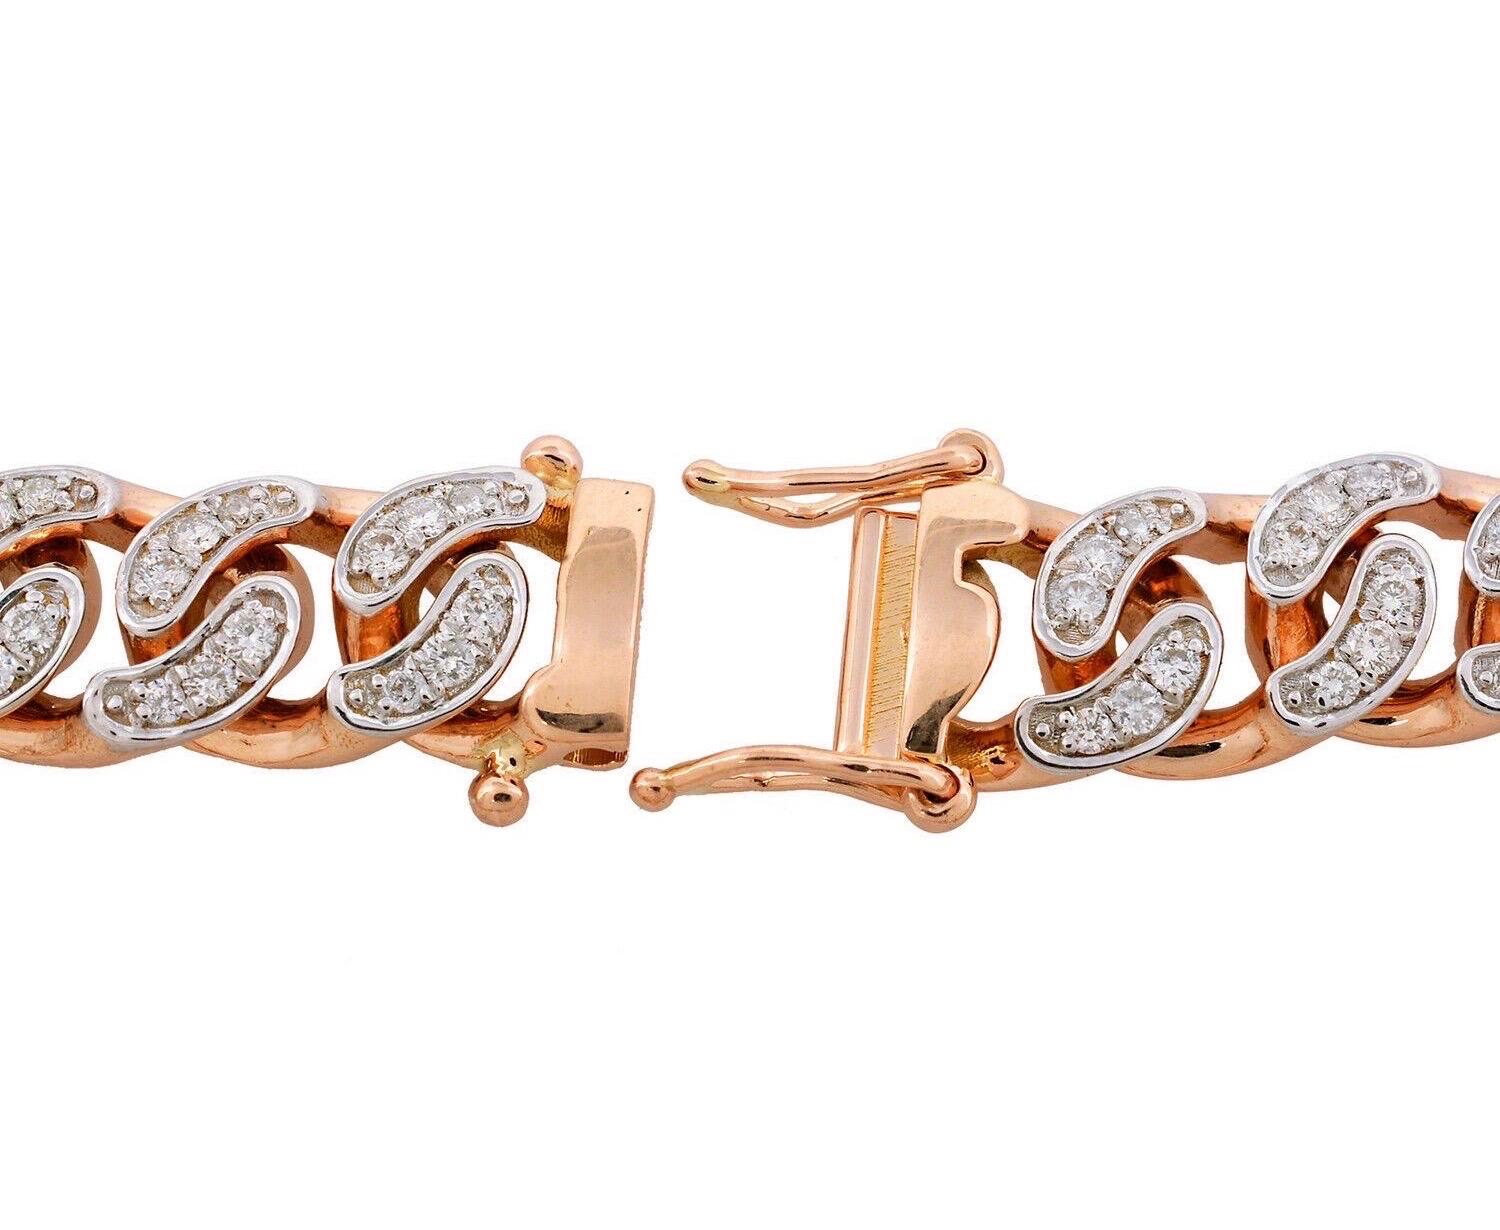 Cast from 18-karat rose gold, this link bracelet is hand set with 2.20 carats of sparkling diamonds. 
Available in yellow, rose and white gold. Bracelet Size 7 inches.

FOLLOW MEGHNA JEWELS storefront to view the latest collection & exclusive